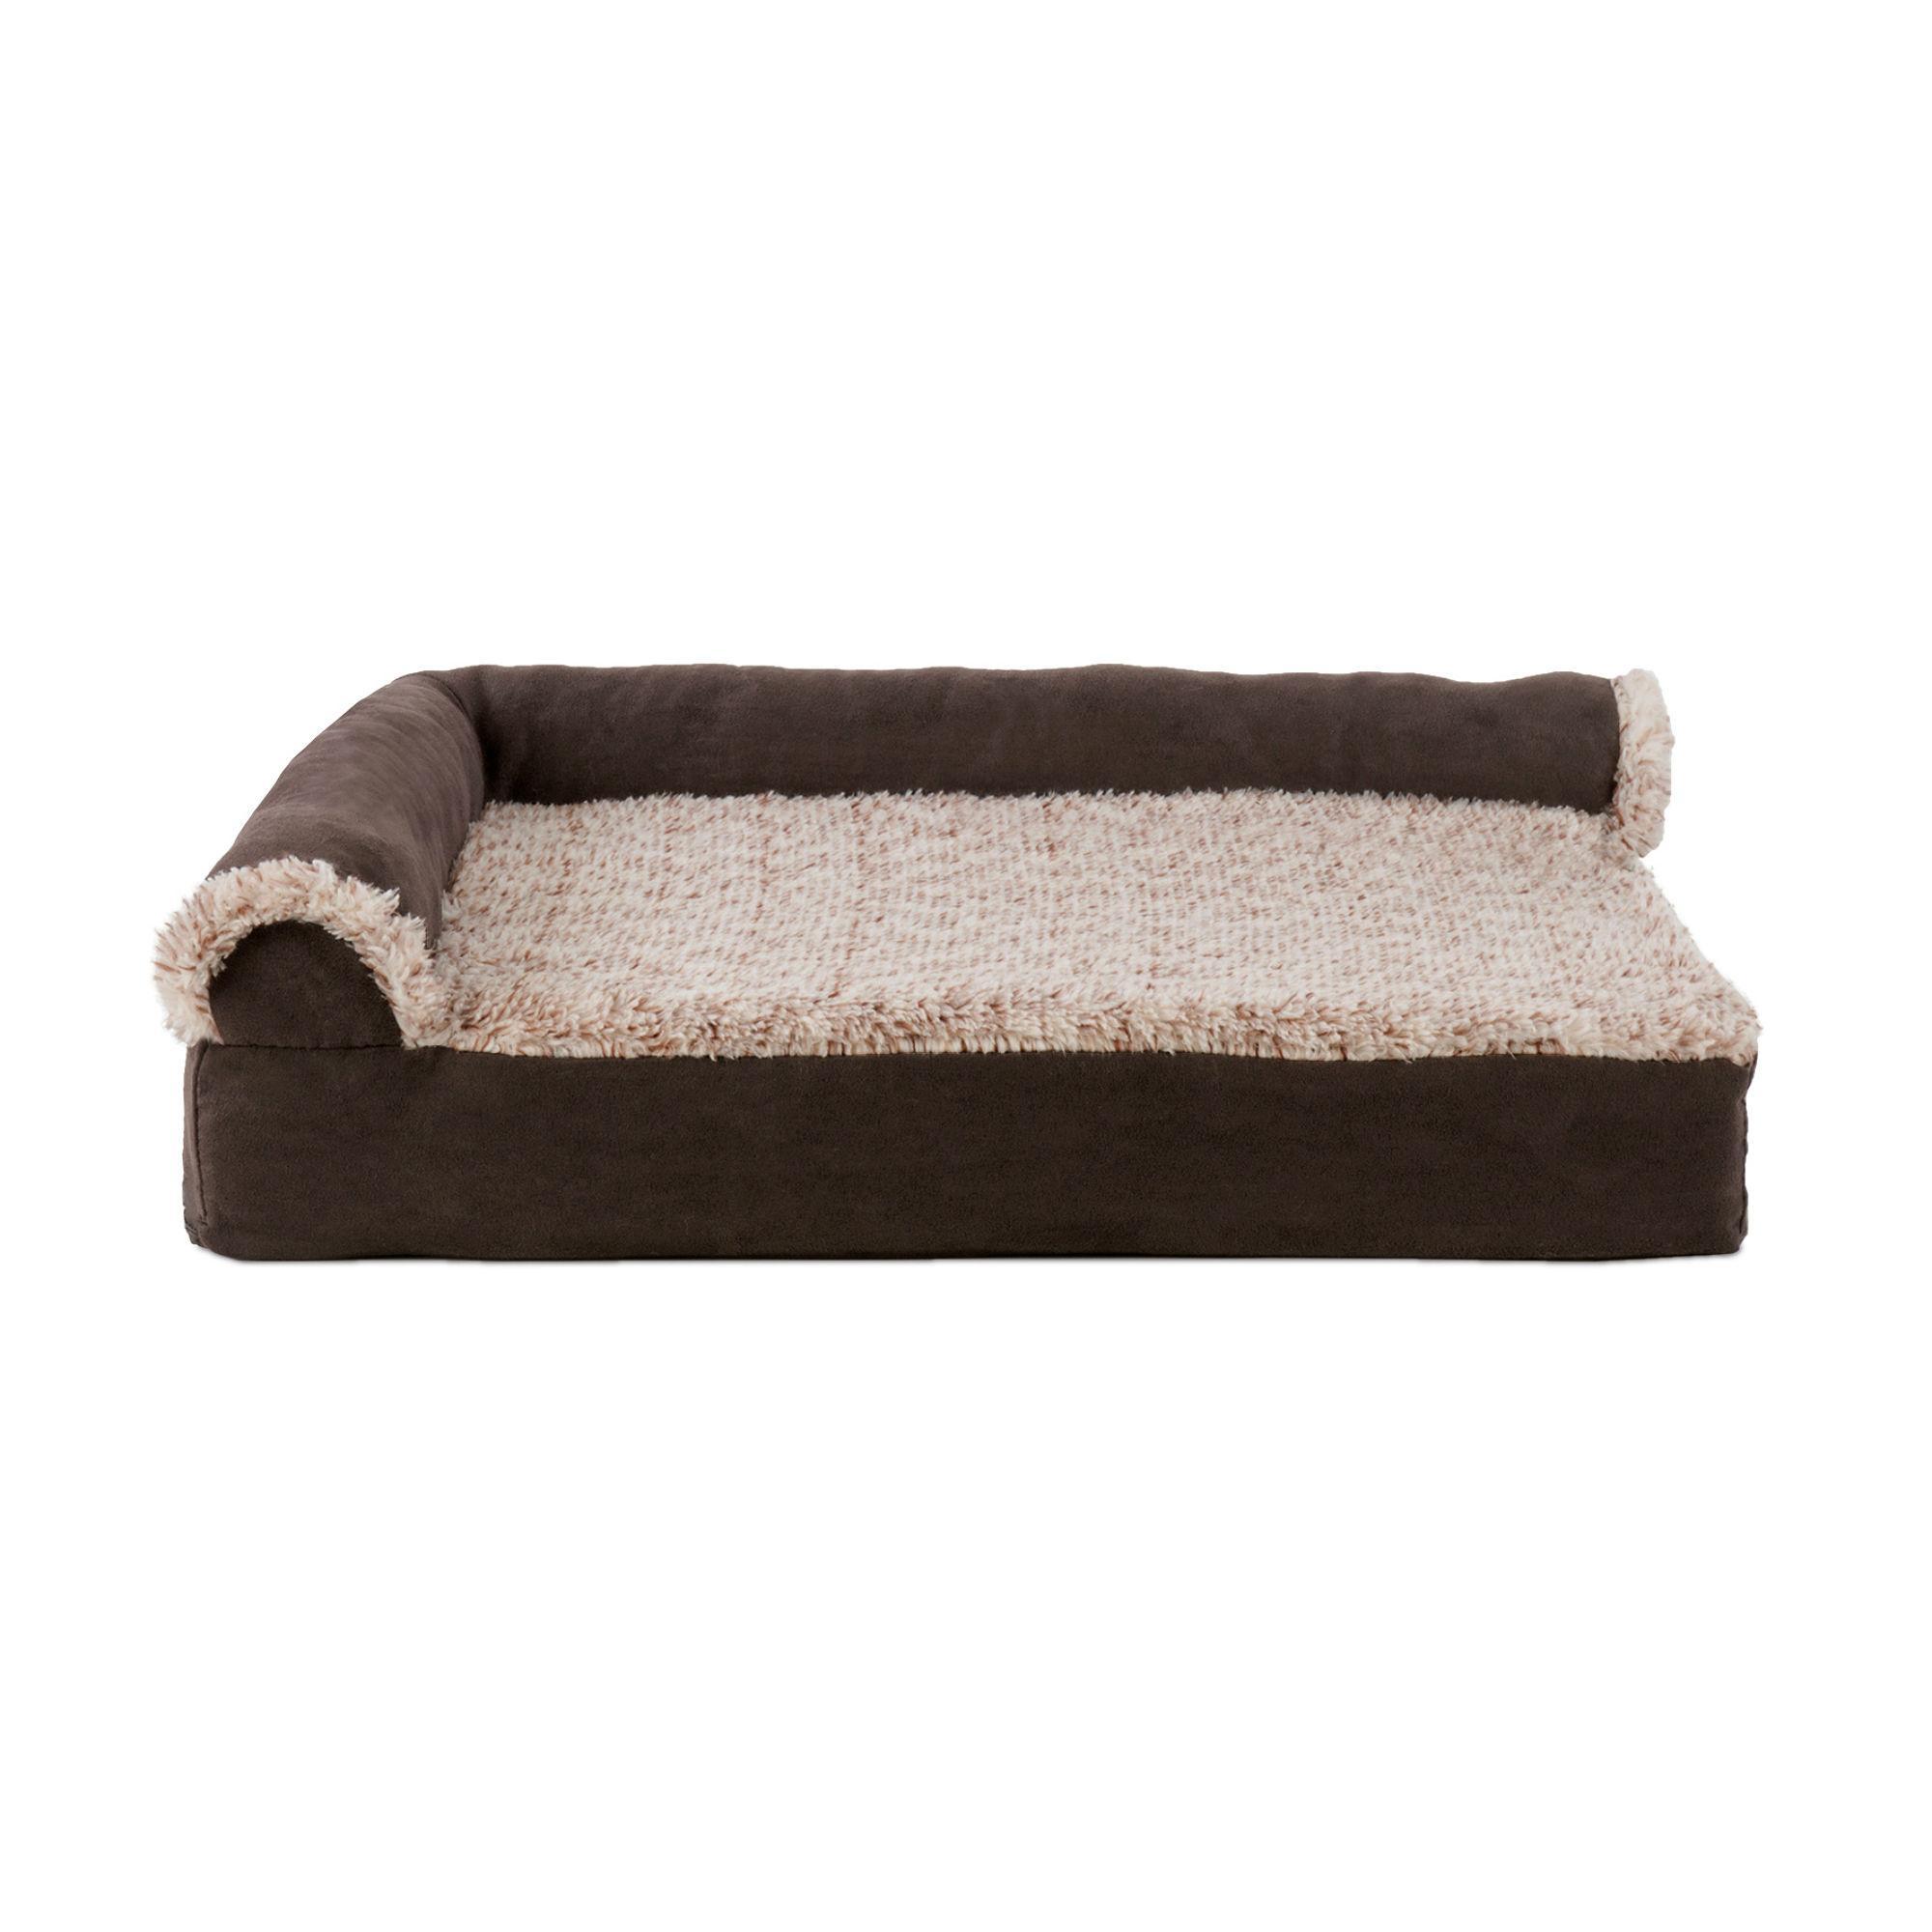 FurHaven Two-Tone Faux Fur & Suede Deluxe Chaise Lounge Memory Top Pet Bed - Espresso